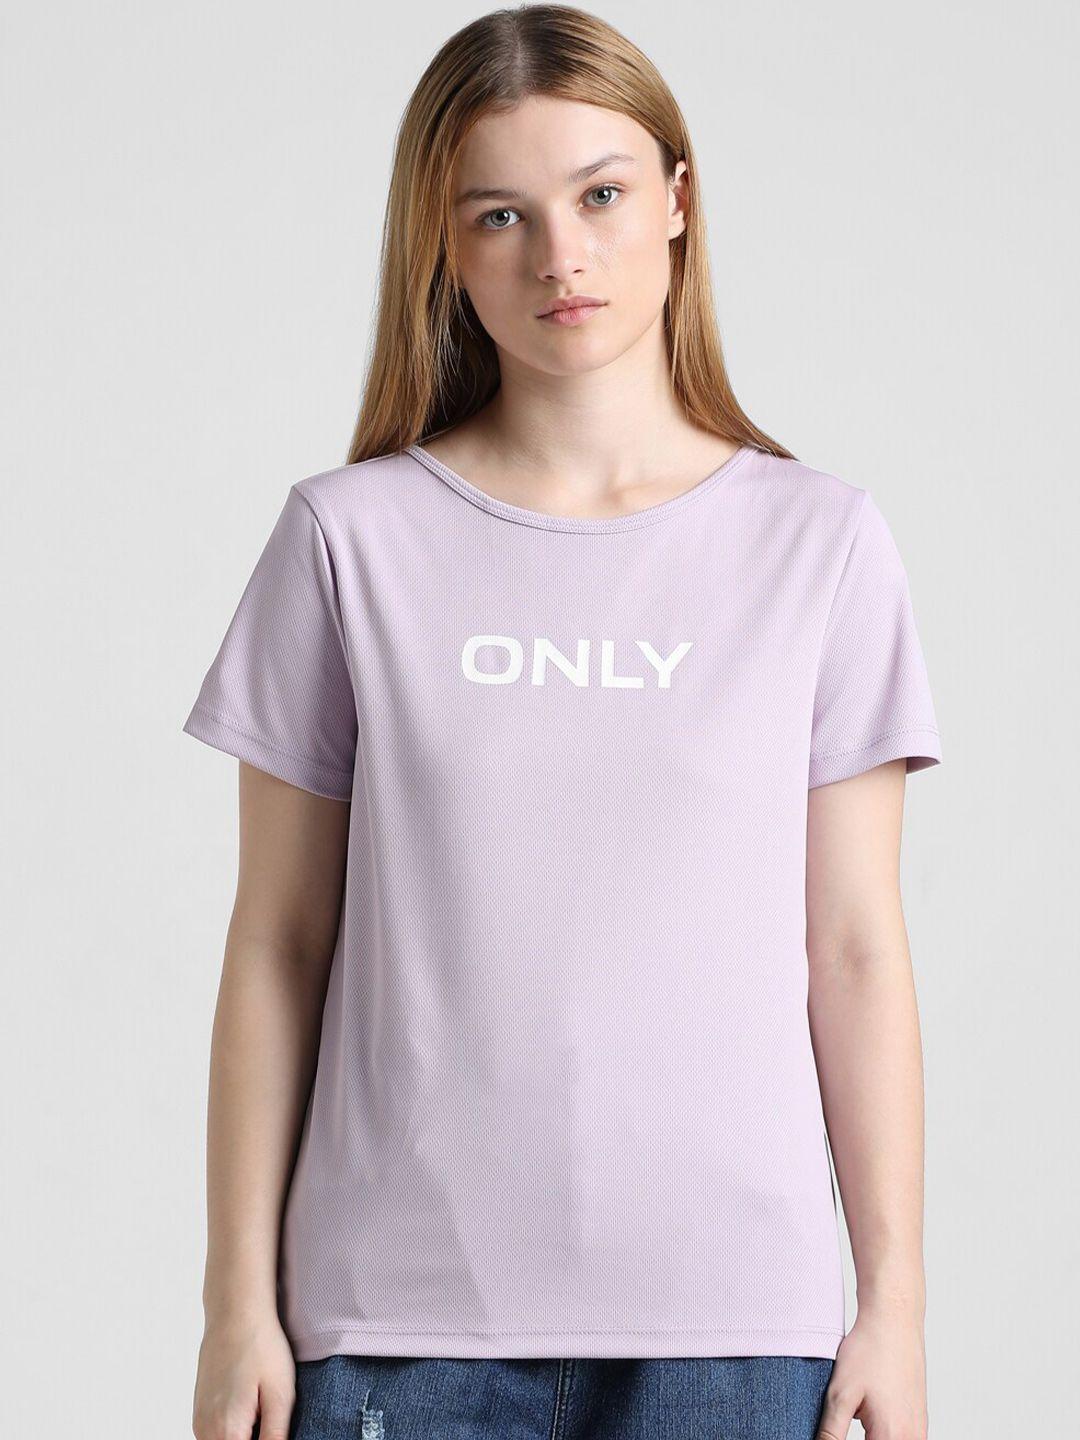 only typography round neck t-shirt